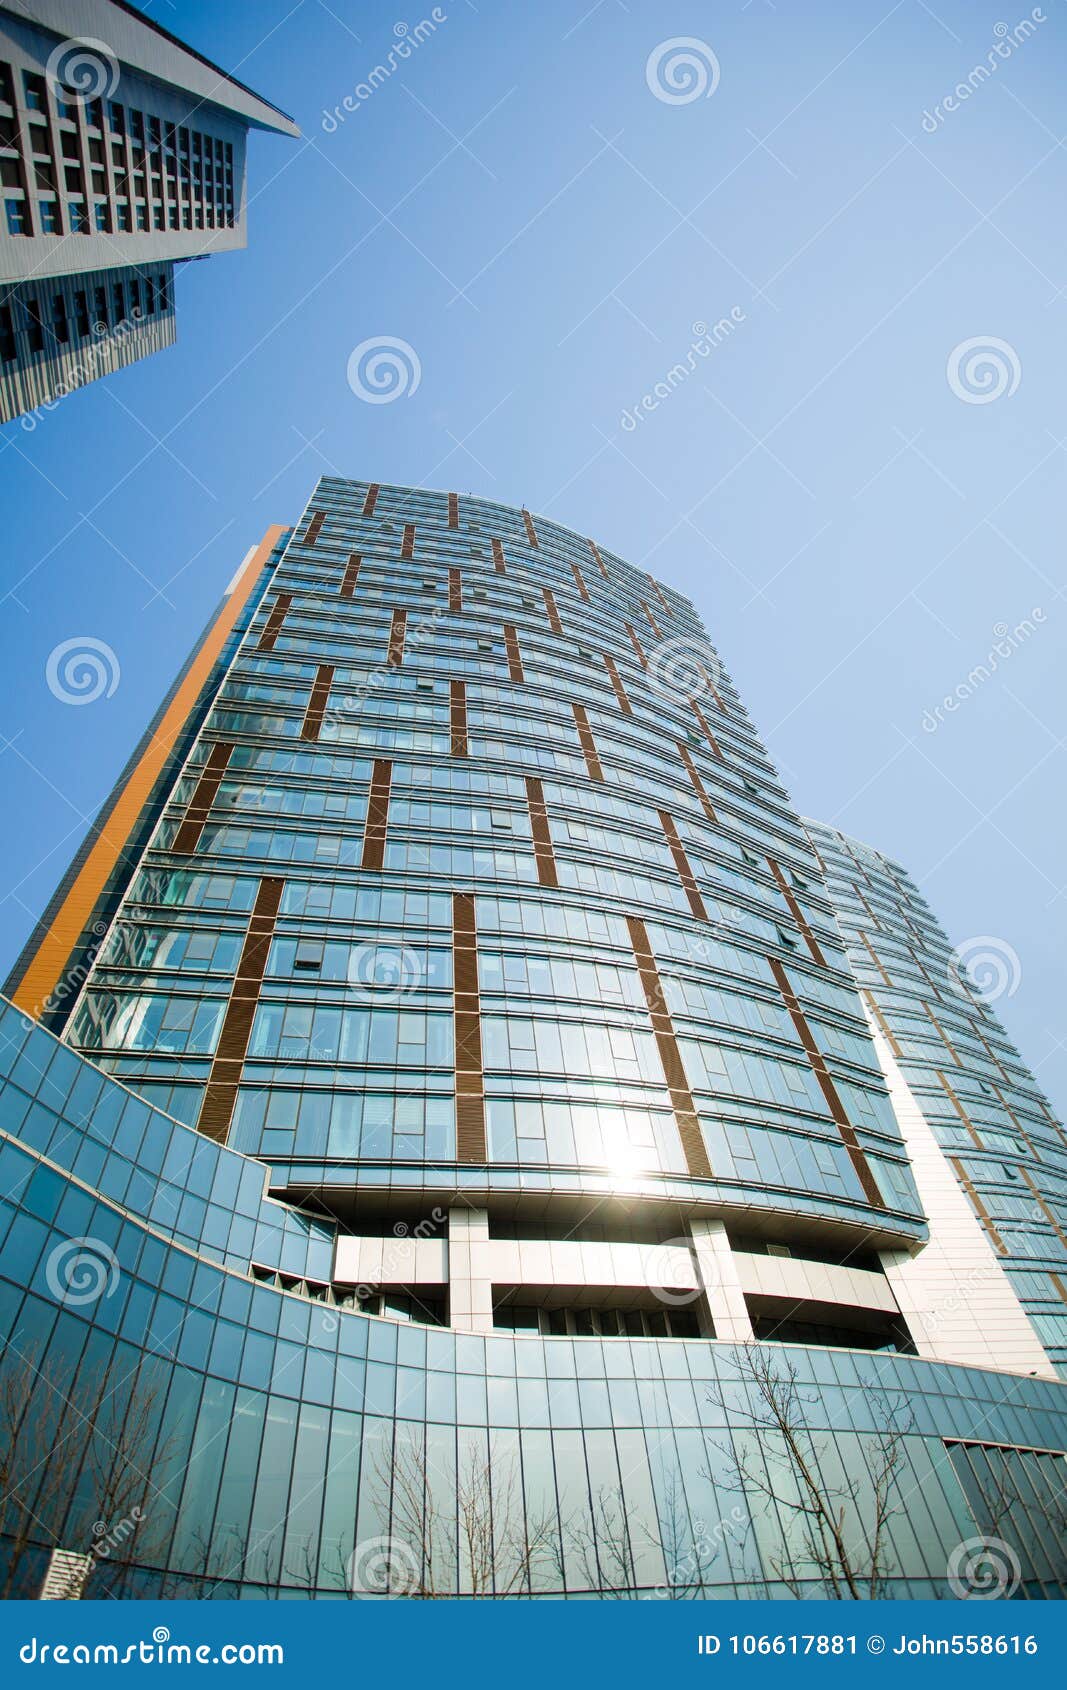 Glass Curtain Wall Construction  Stock Image Image of 